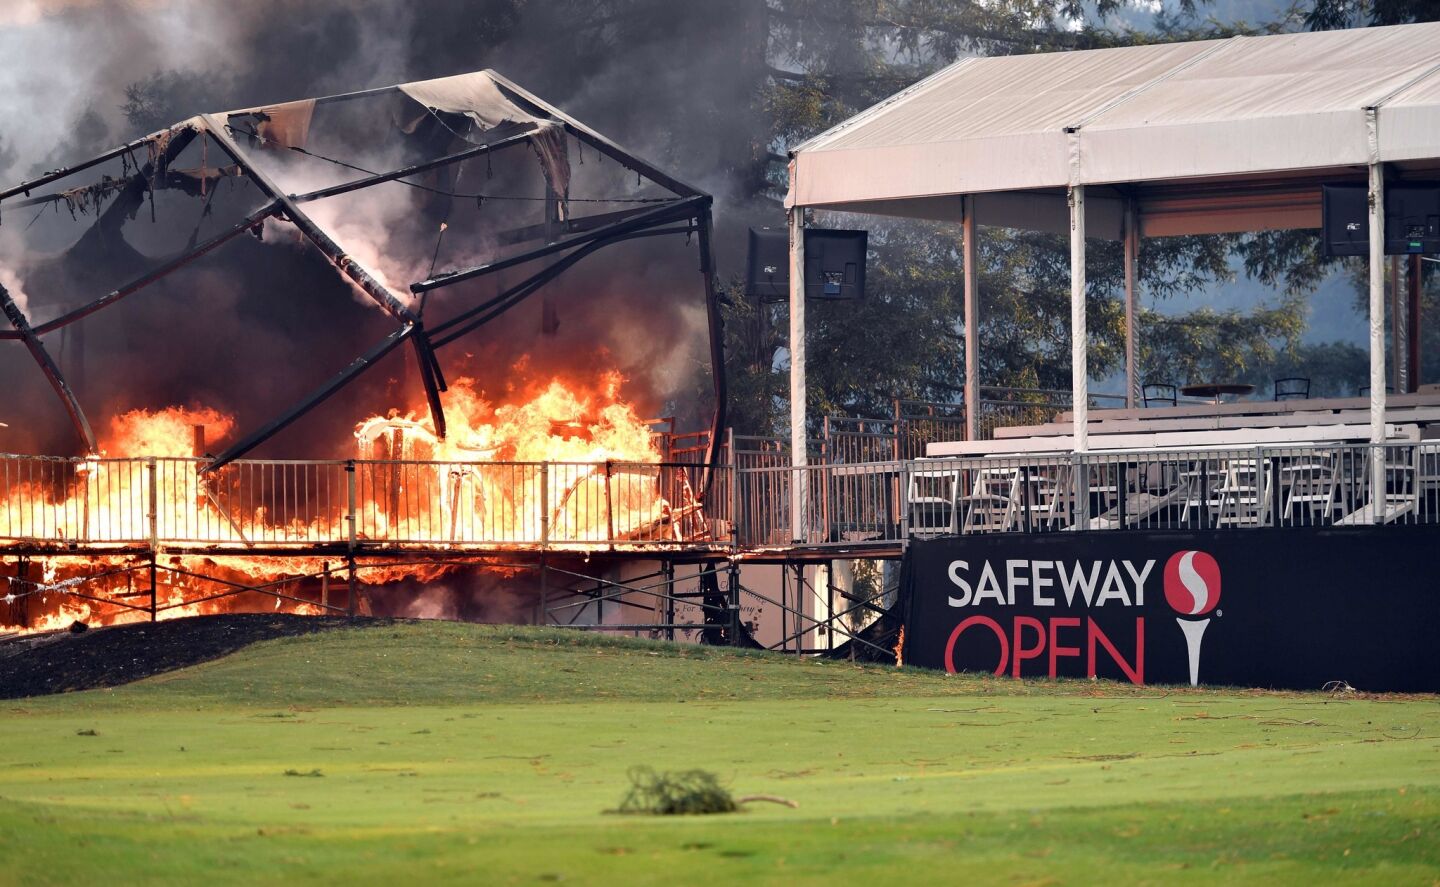 A tent structure built for the 2017 Safeway Open burns in Napa on Monday.